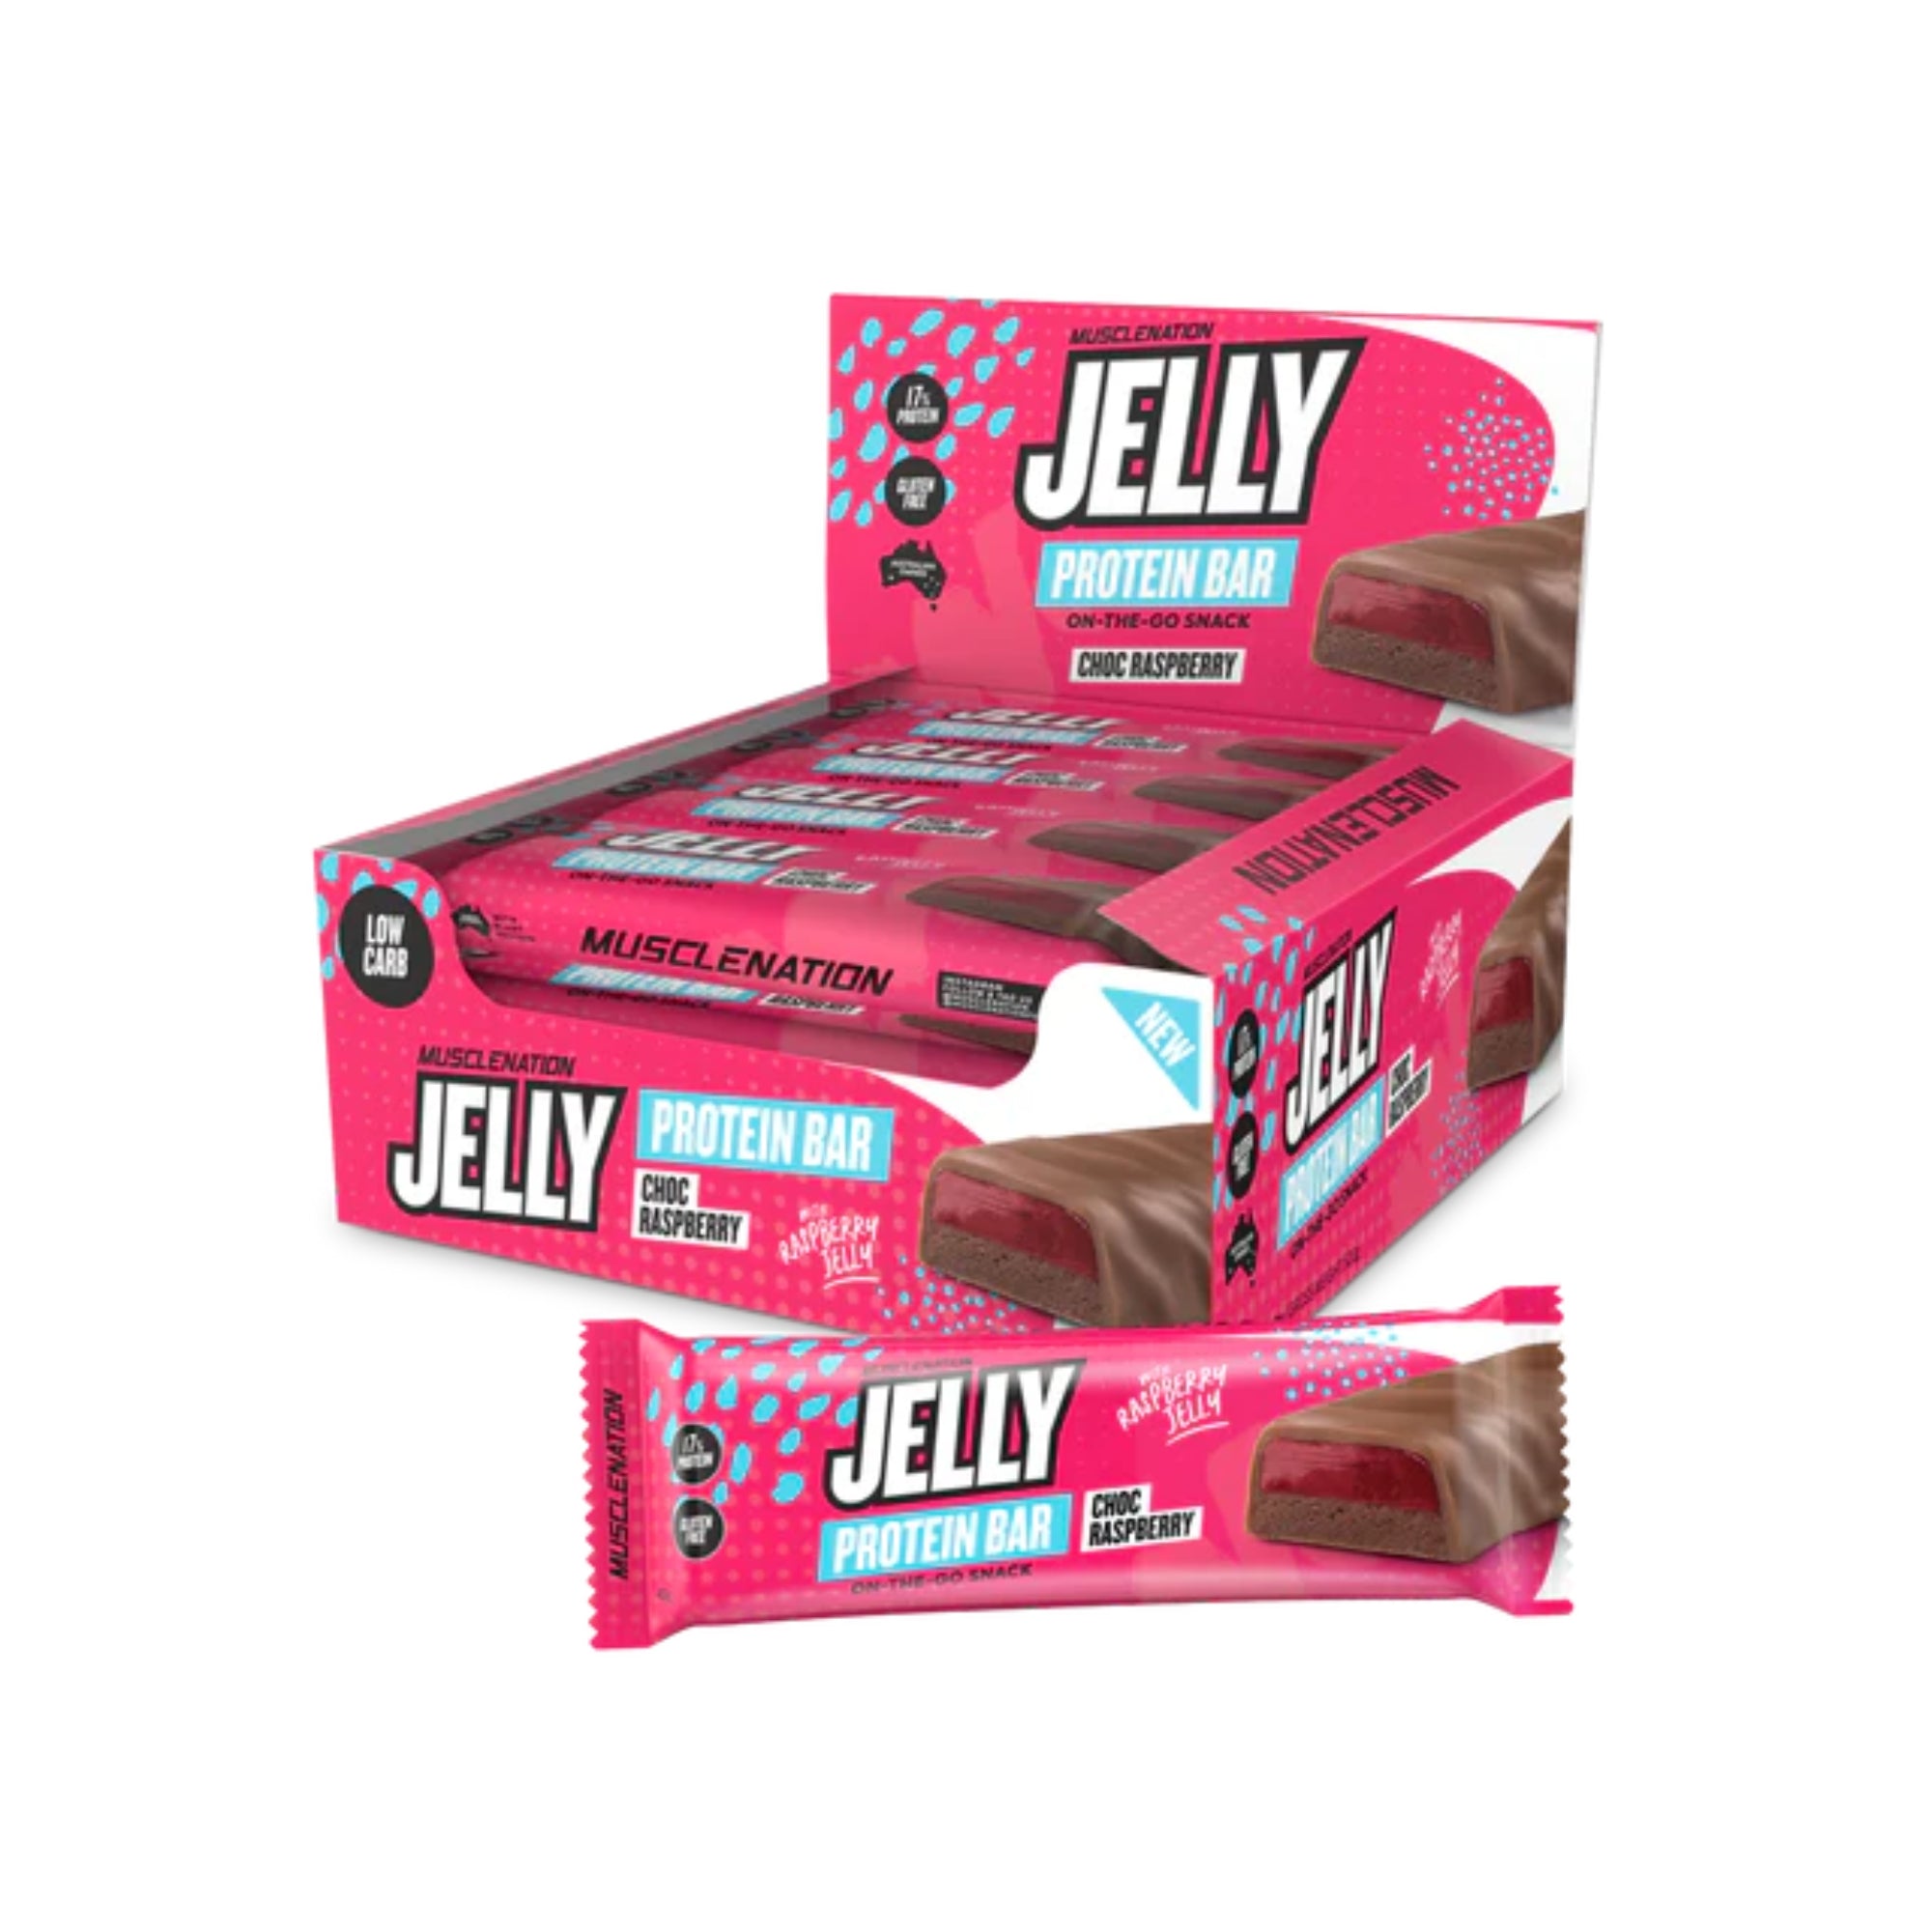 Muscle Nation Jelly Protein Bar - Choc Raspberry Box of 12